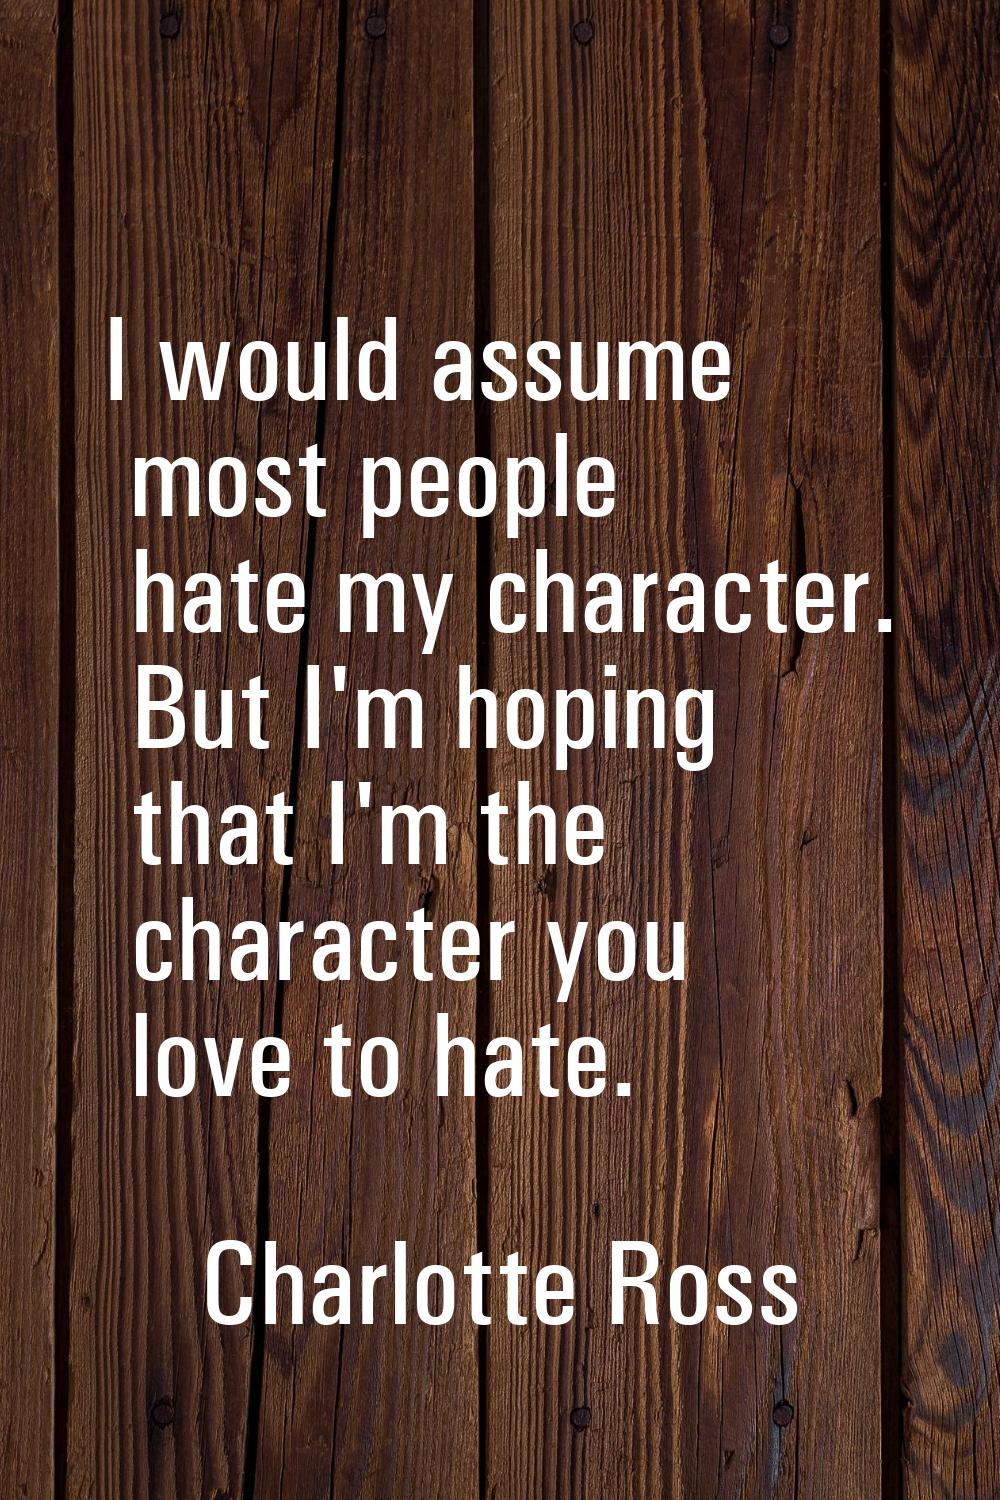 I would assume most people hate my character. But I'm hoping that I'm the character you love to hat